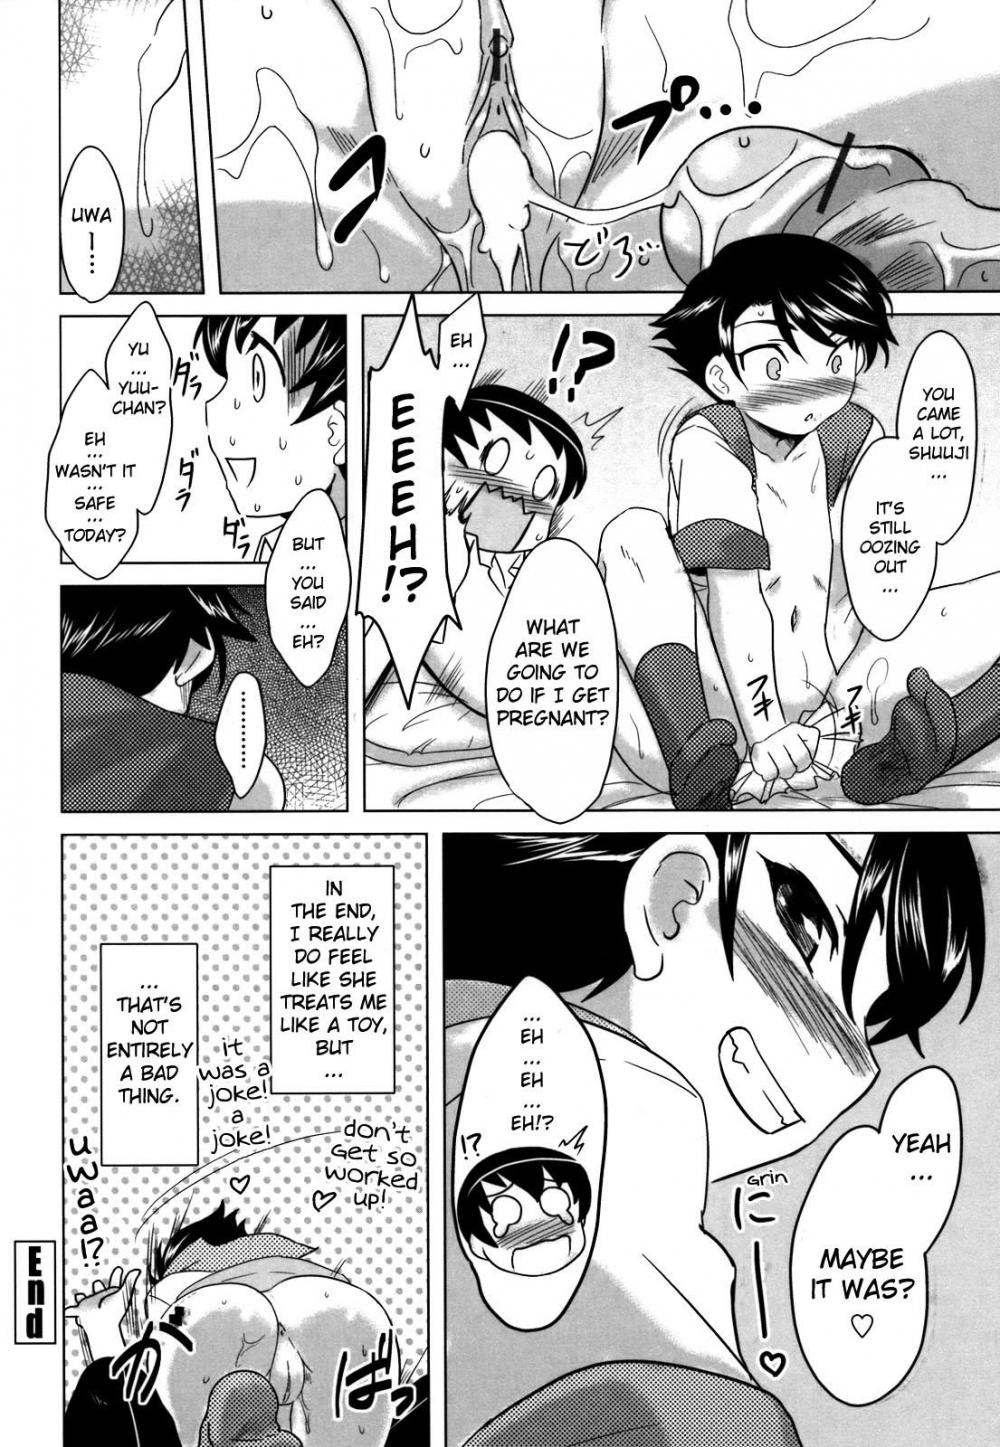 Hentai Manga Comic-Whenever You Touch Me-Chapter 4-18